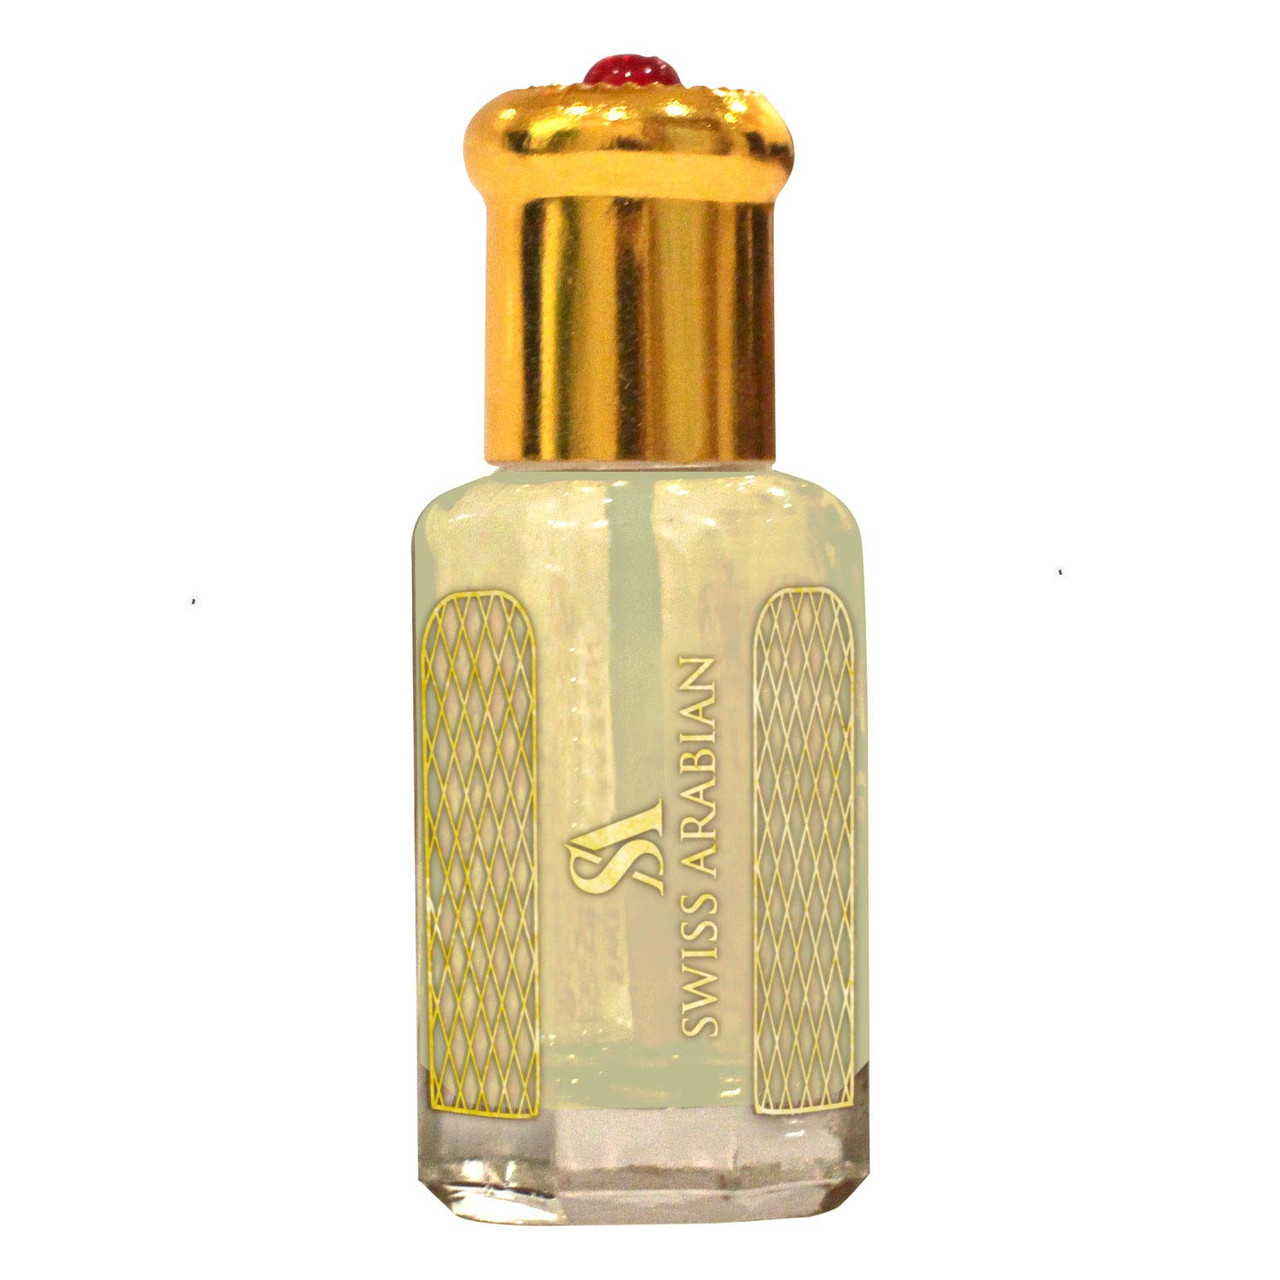 Golden Sand Perfume Alcohol Free Scented Arabian Oil Cologne Exotic Attar -  12ML